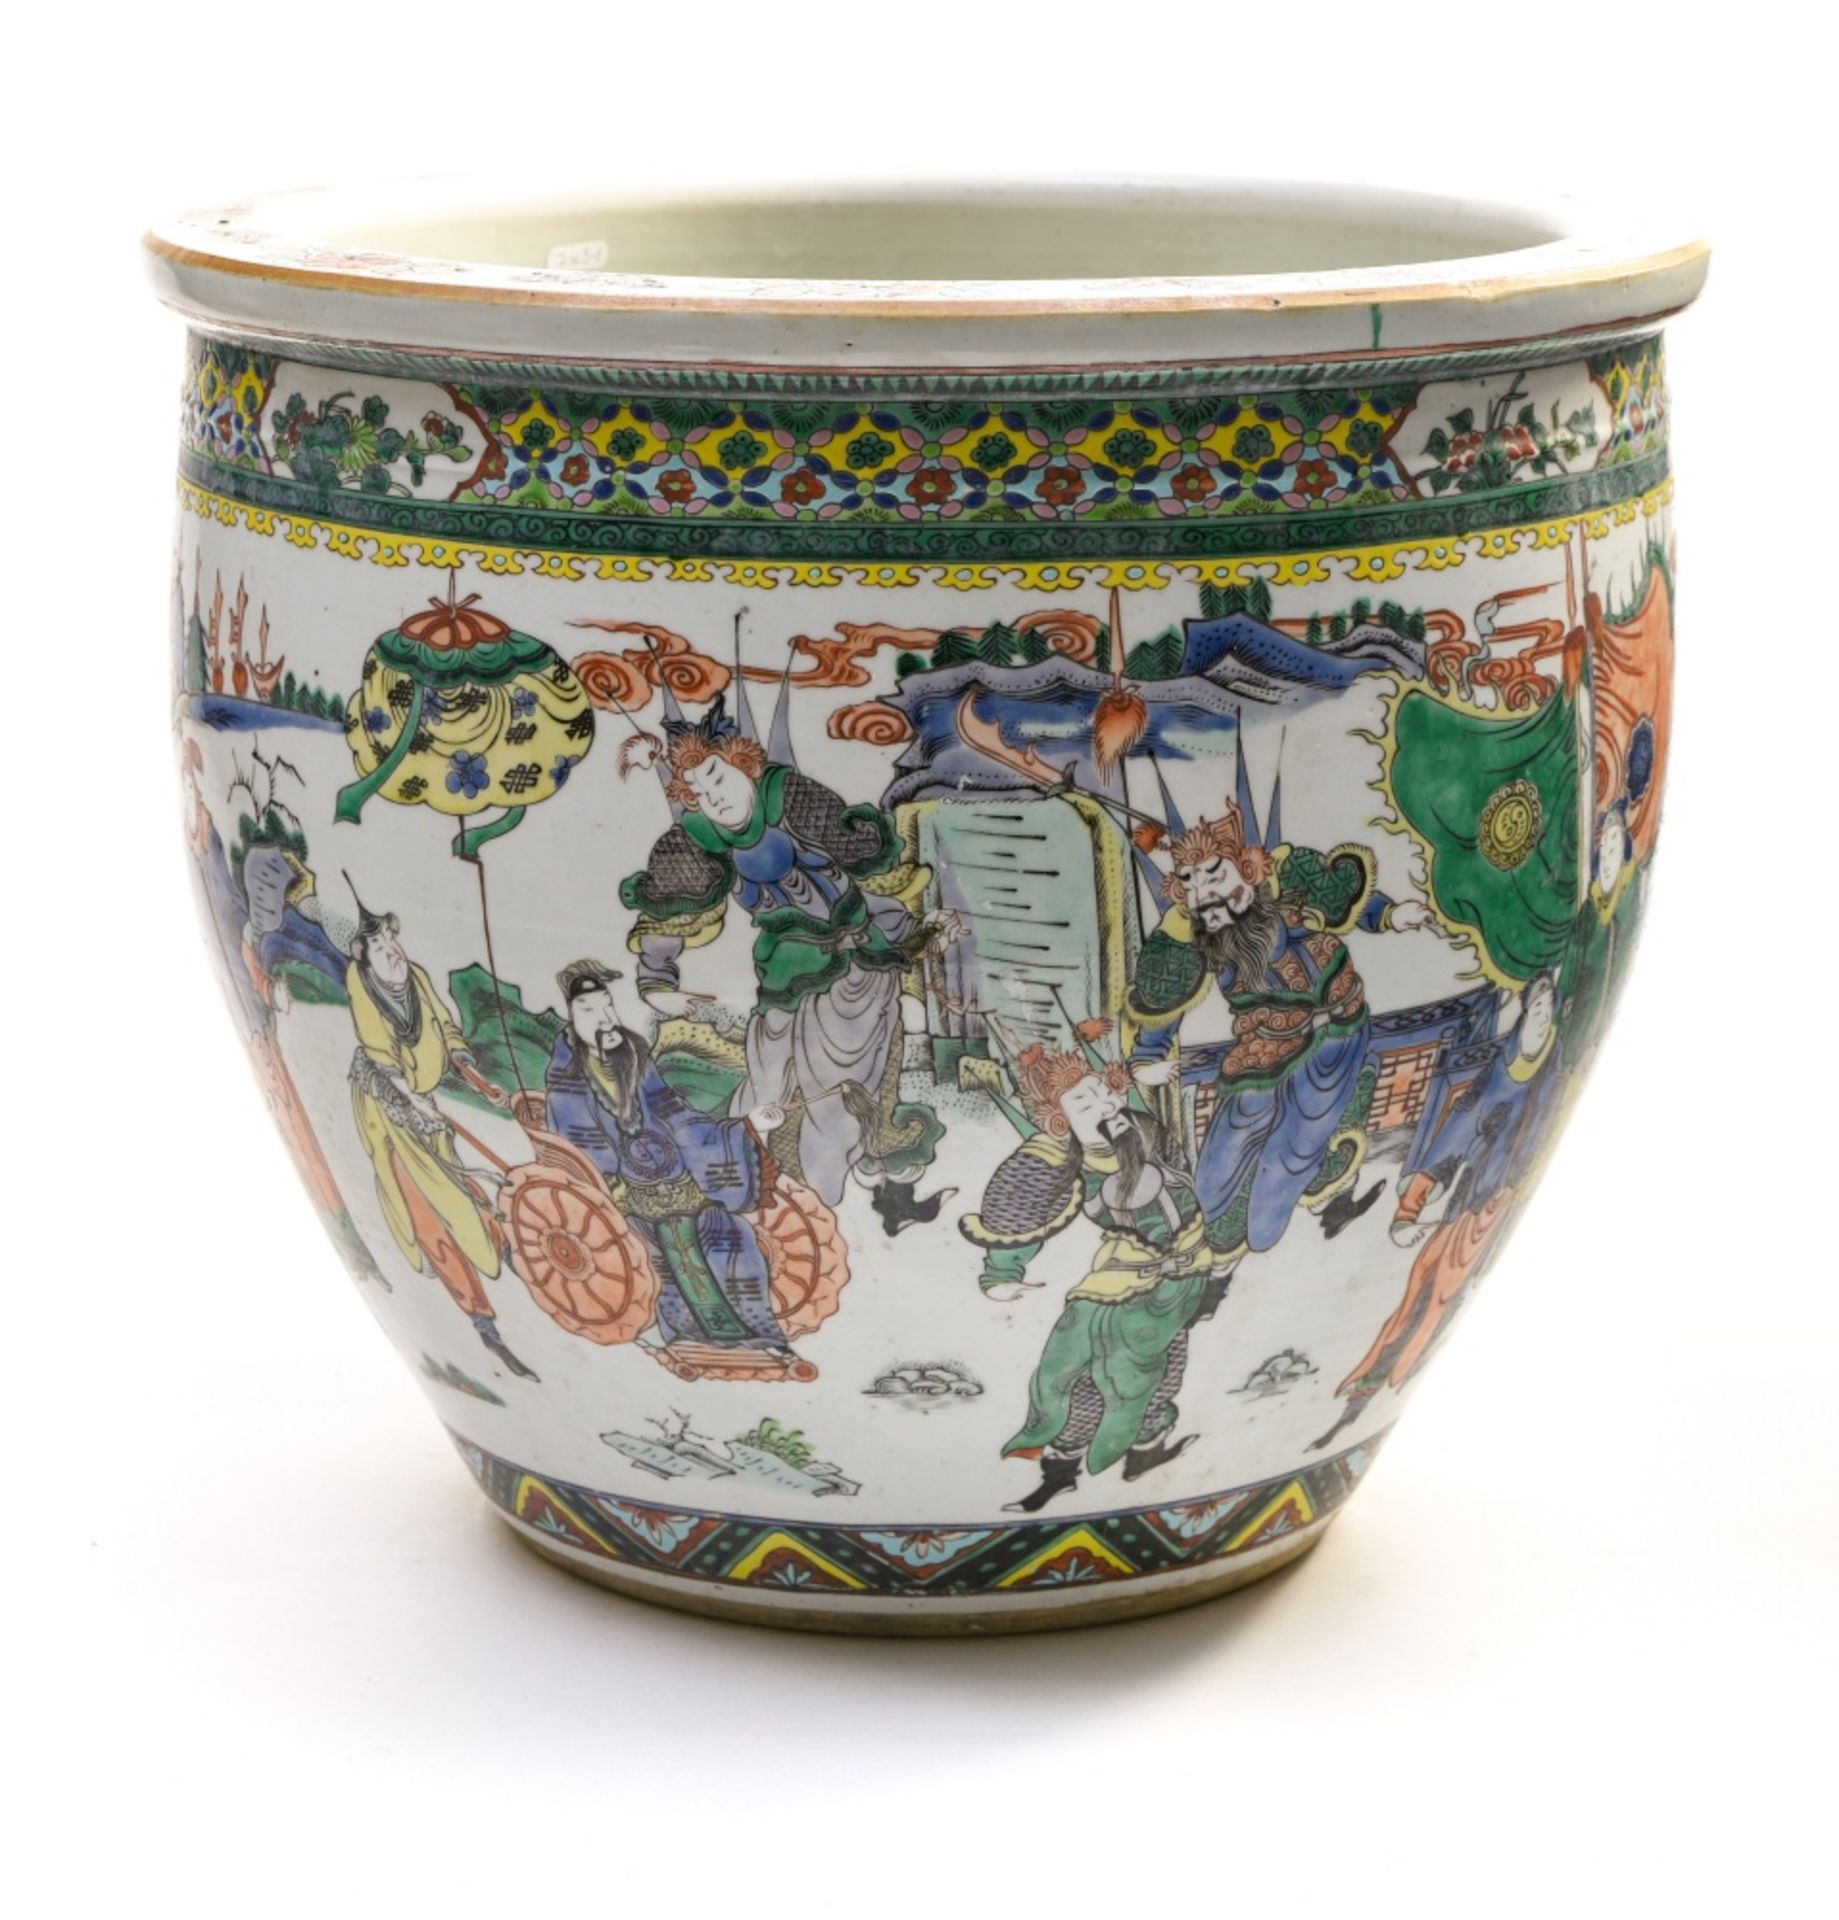 China, late 19th century, early 20th century Famille Verte planter or aquarium, Porcelain decorated - Image 2 of 7